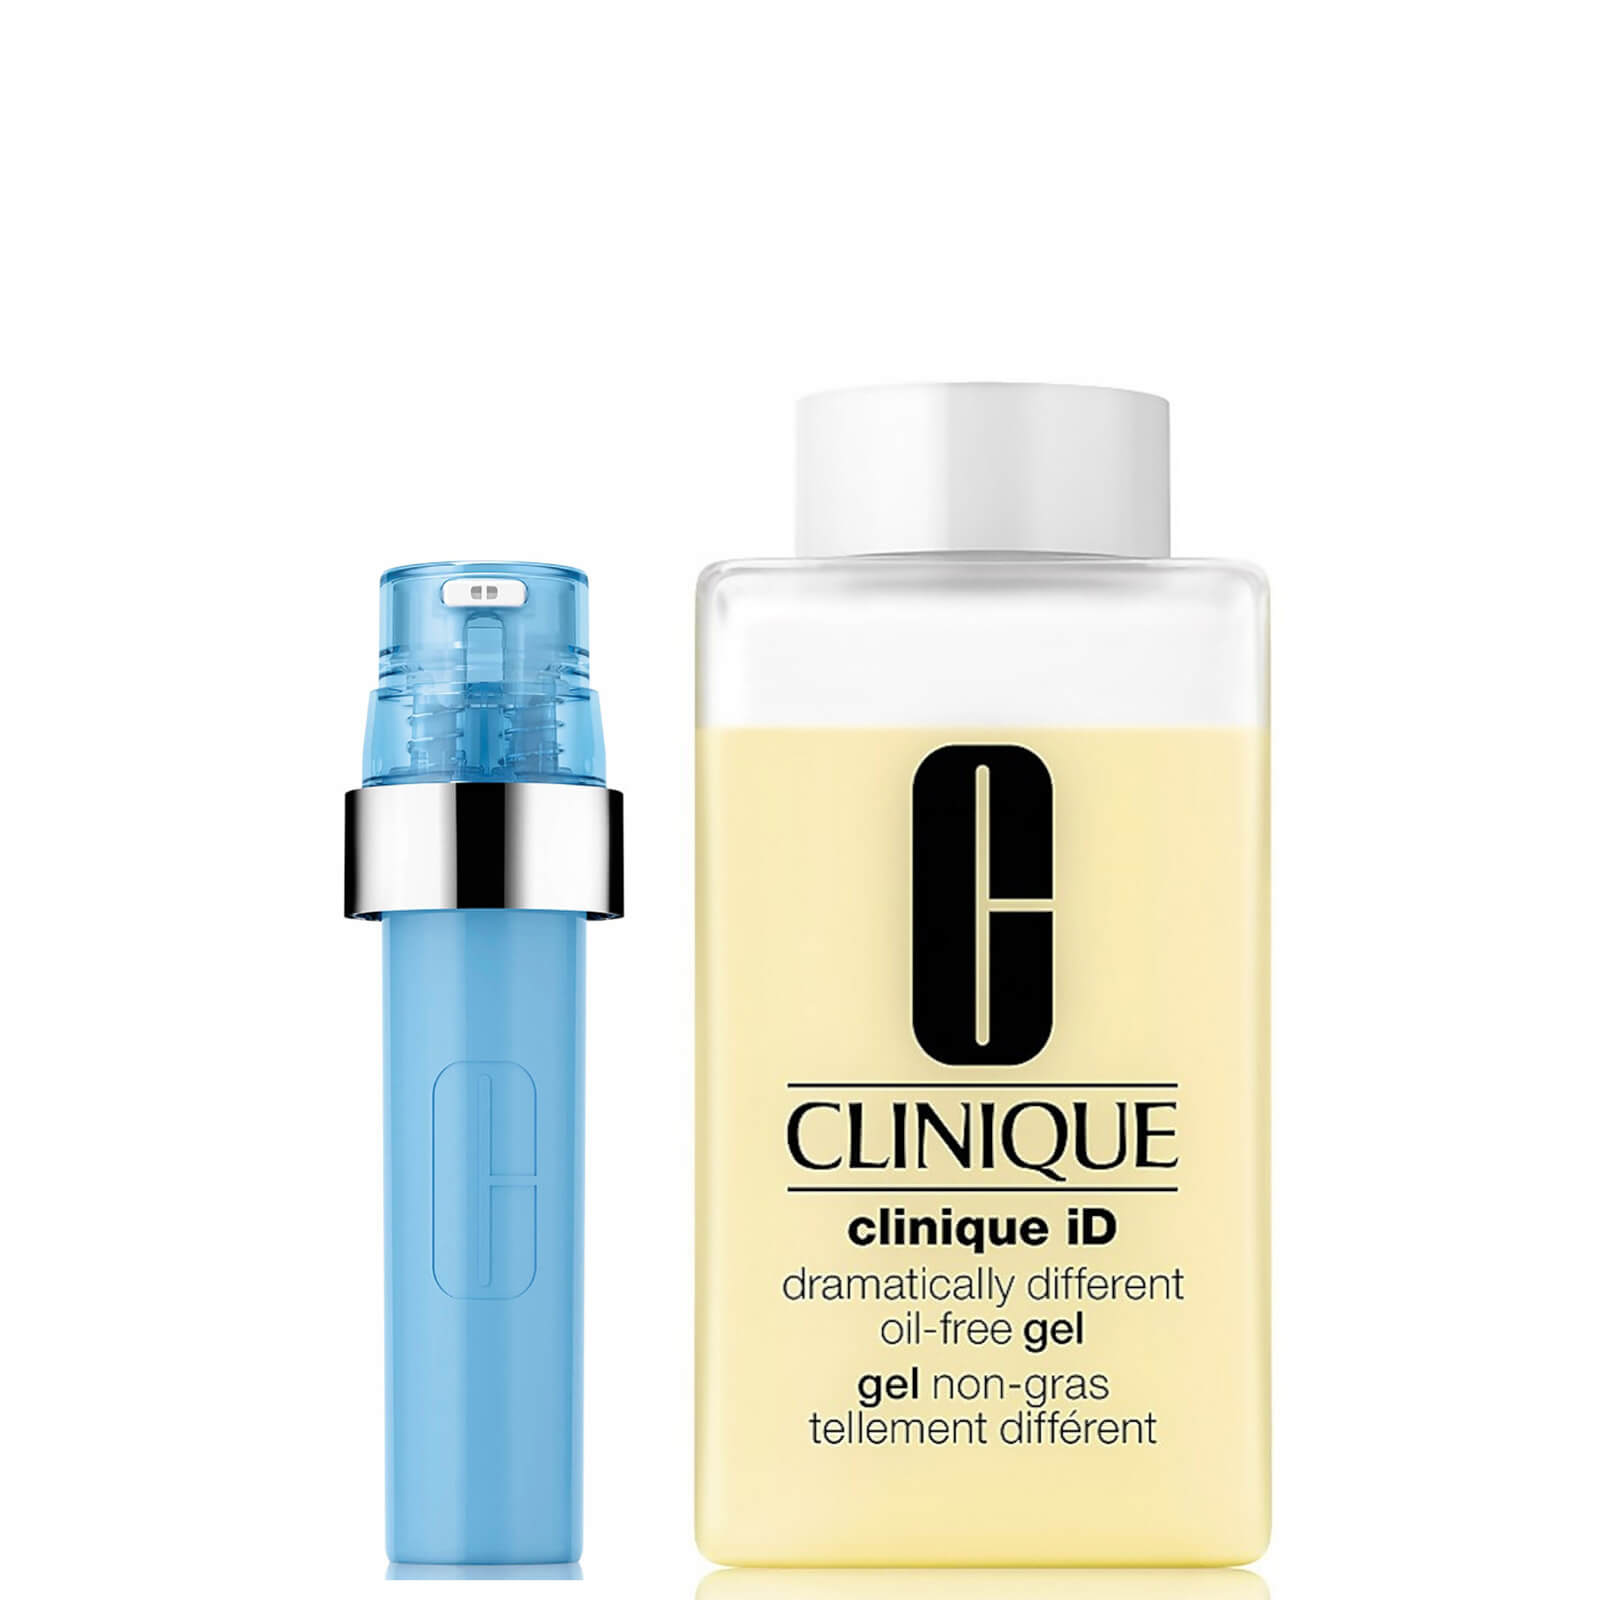 Clinique iD Dramatically Different Oil-Free Gel and Active Cartridge Concentrate for Uneven Skin Texture Bundle